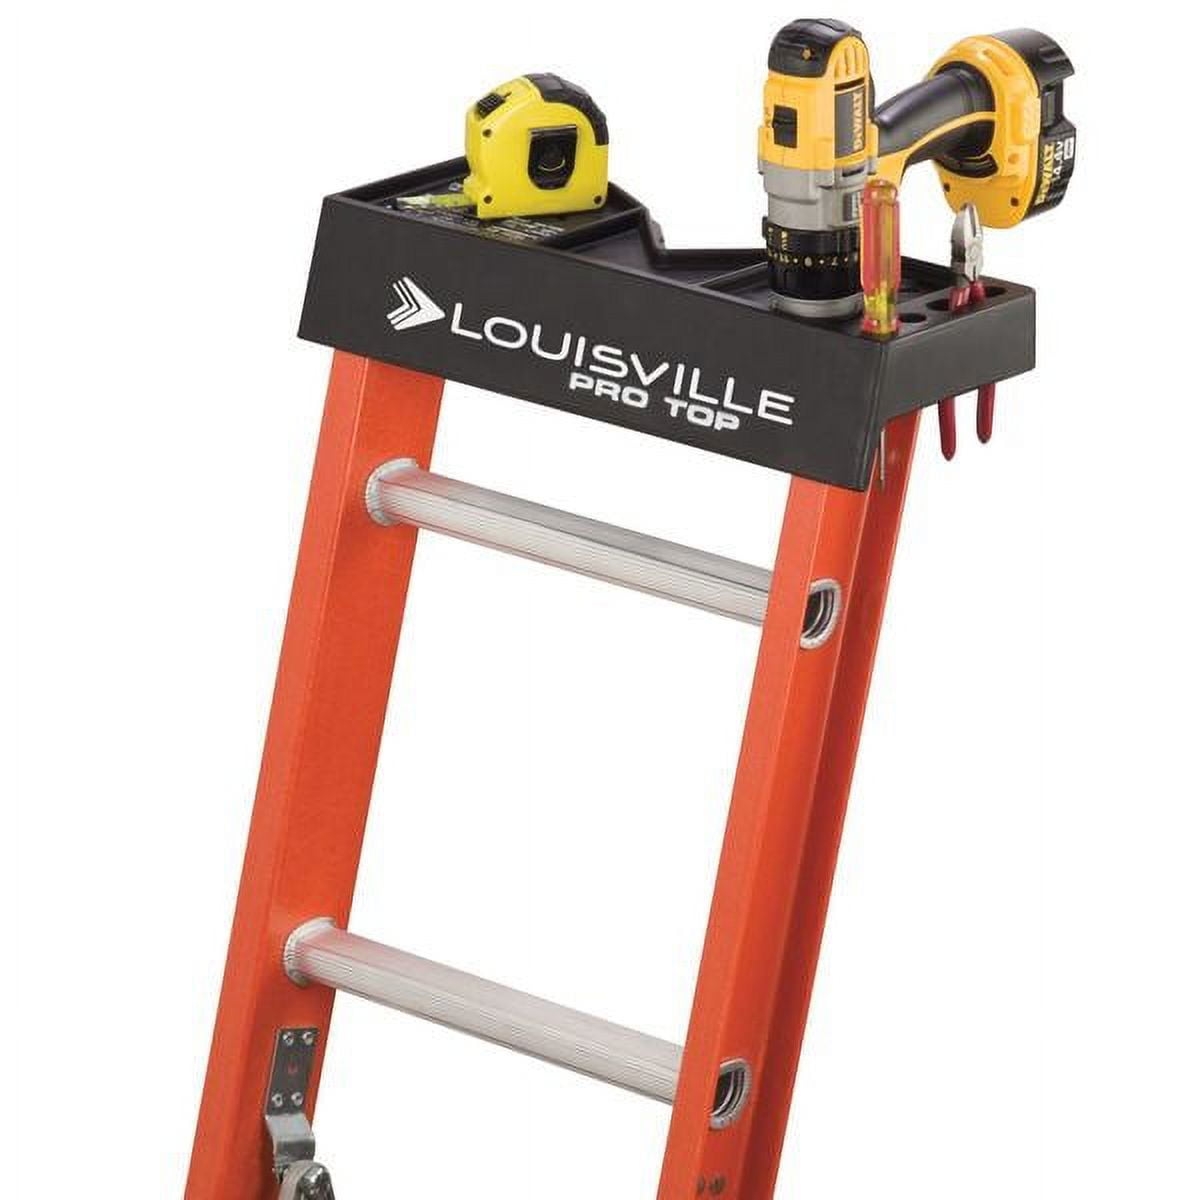 Louisville Fe3224 24'Type 1A 300 Lb Fib,Glass Ext Ladder 8269T16 1102013224  LOUFE3224-24 - Gas and Supply